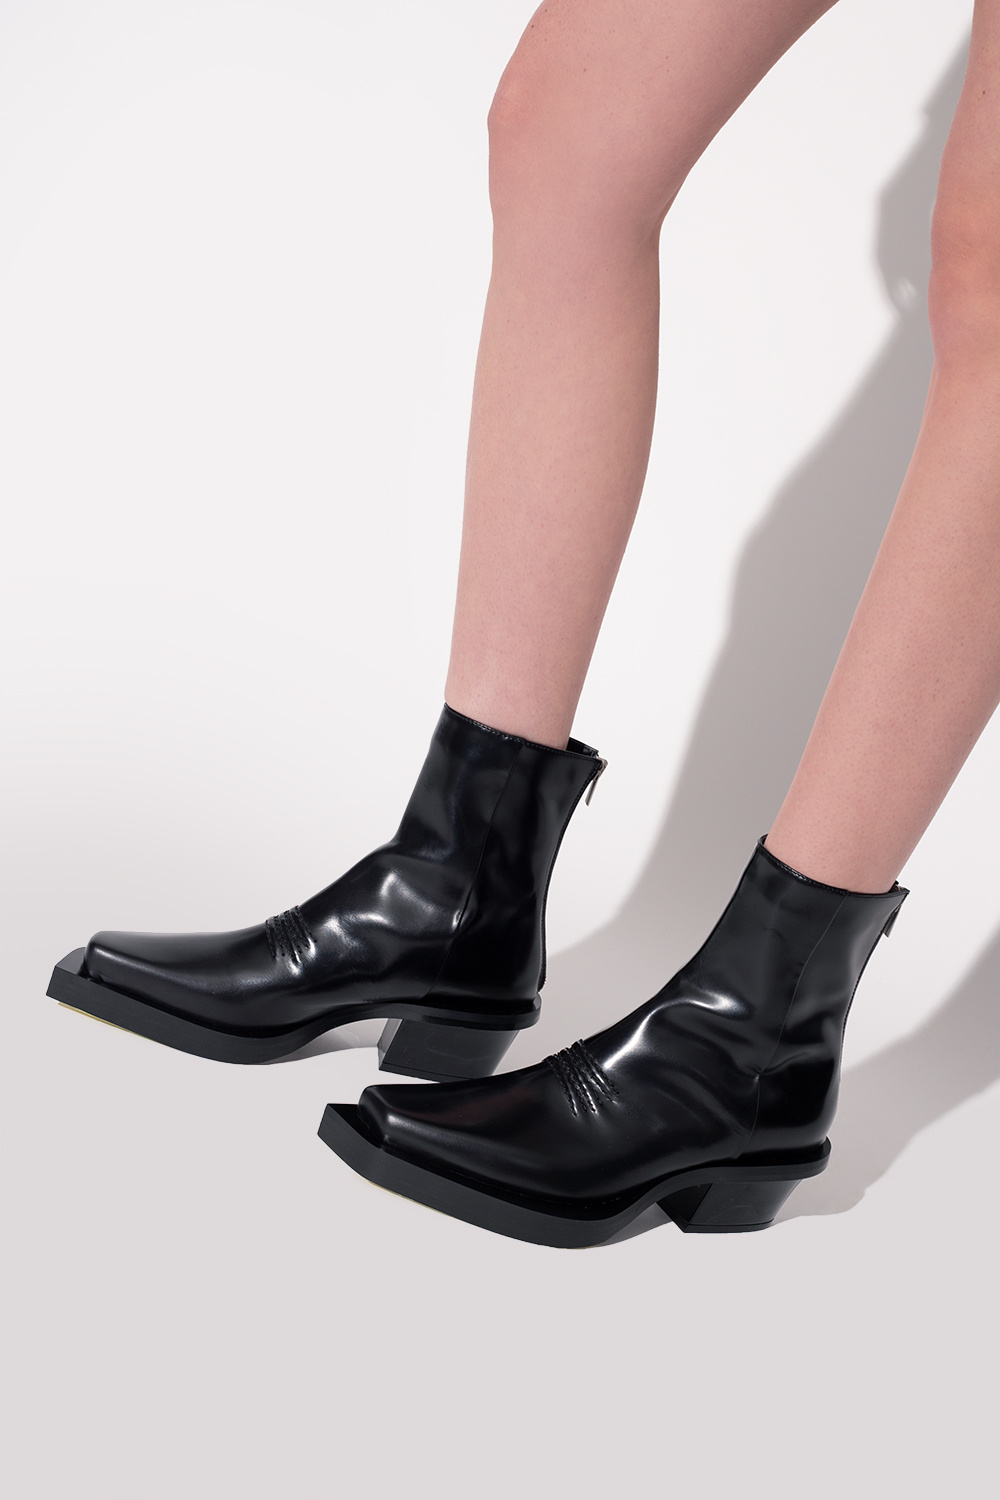 Leone' leather ankle boots 1017 ALYX 9SM - Vitkac US